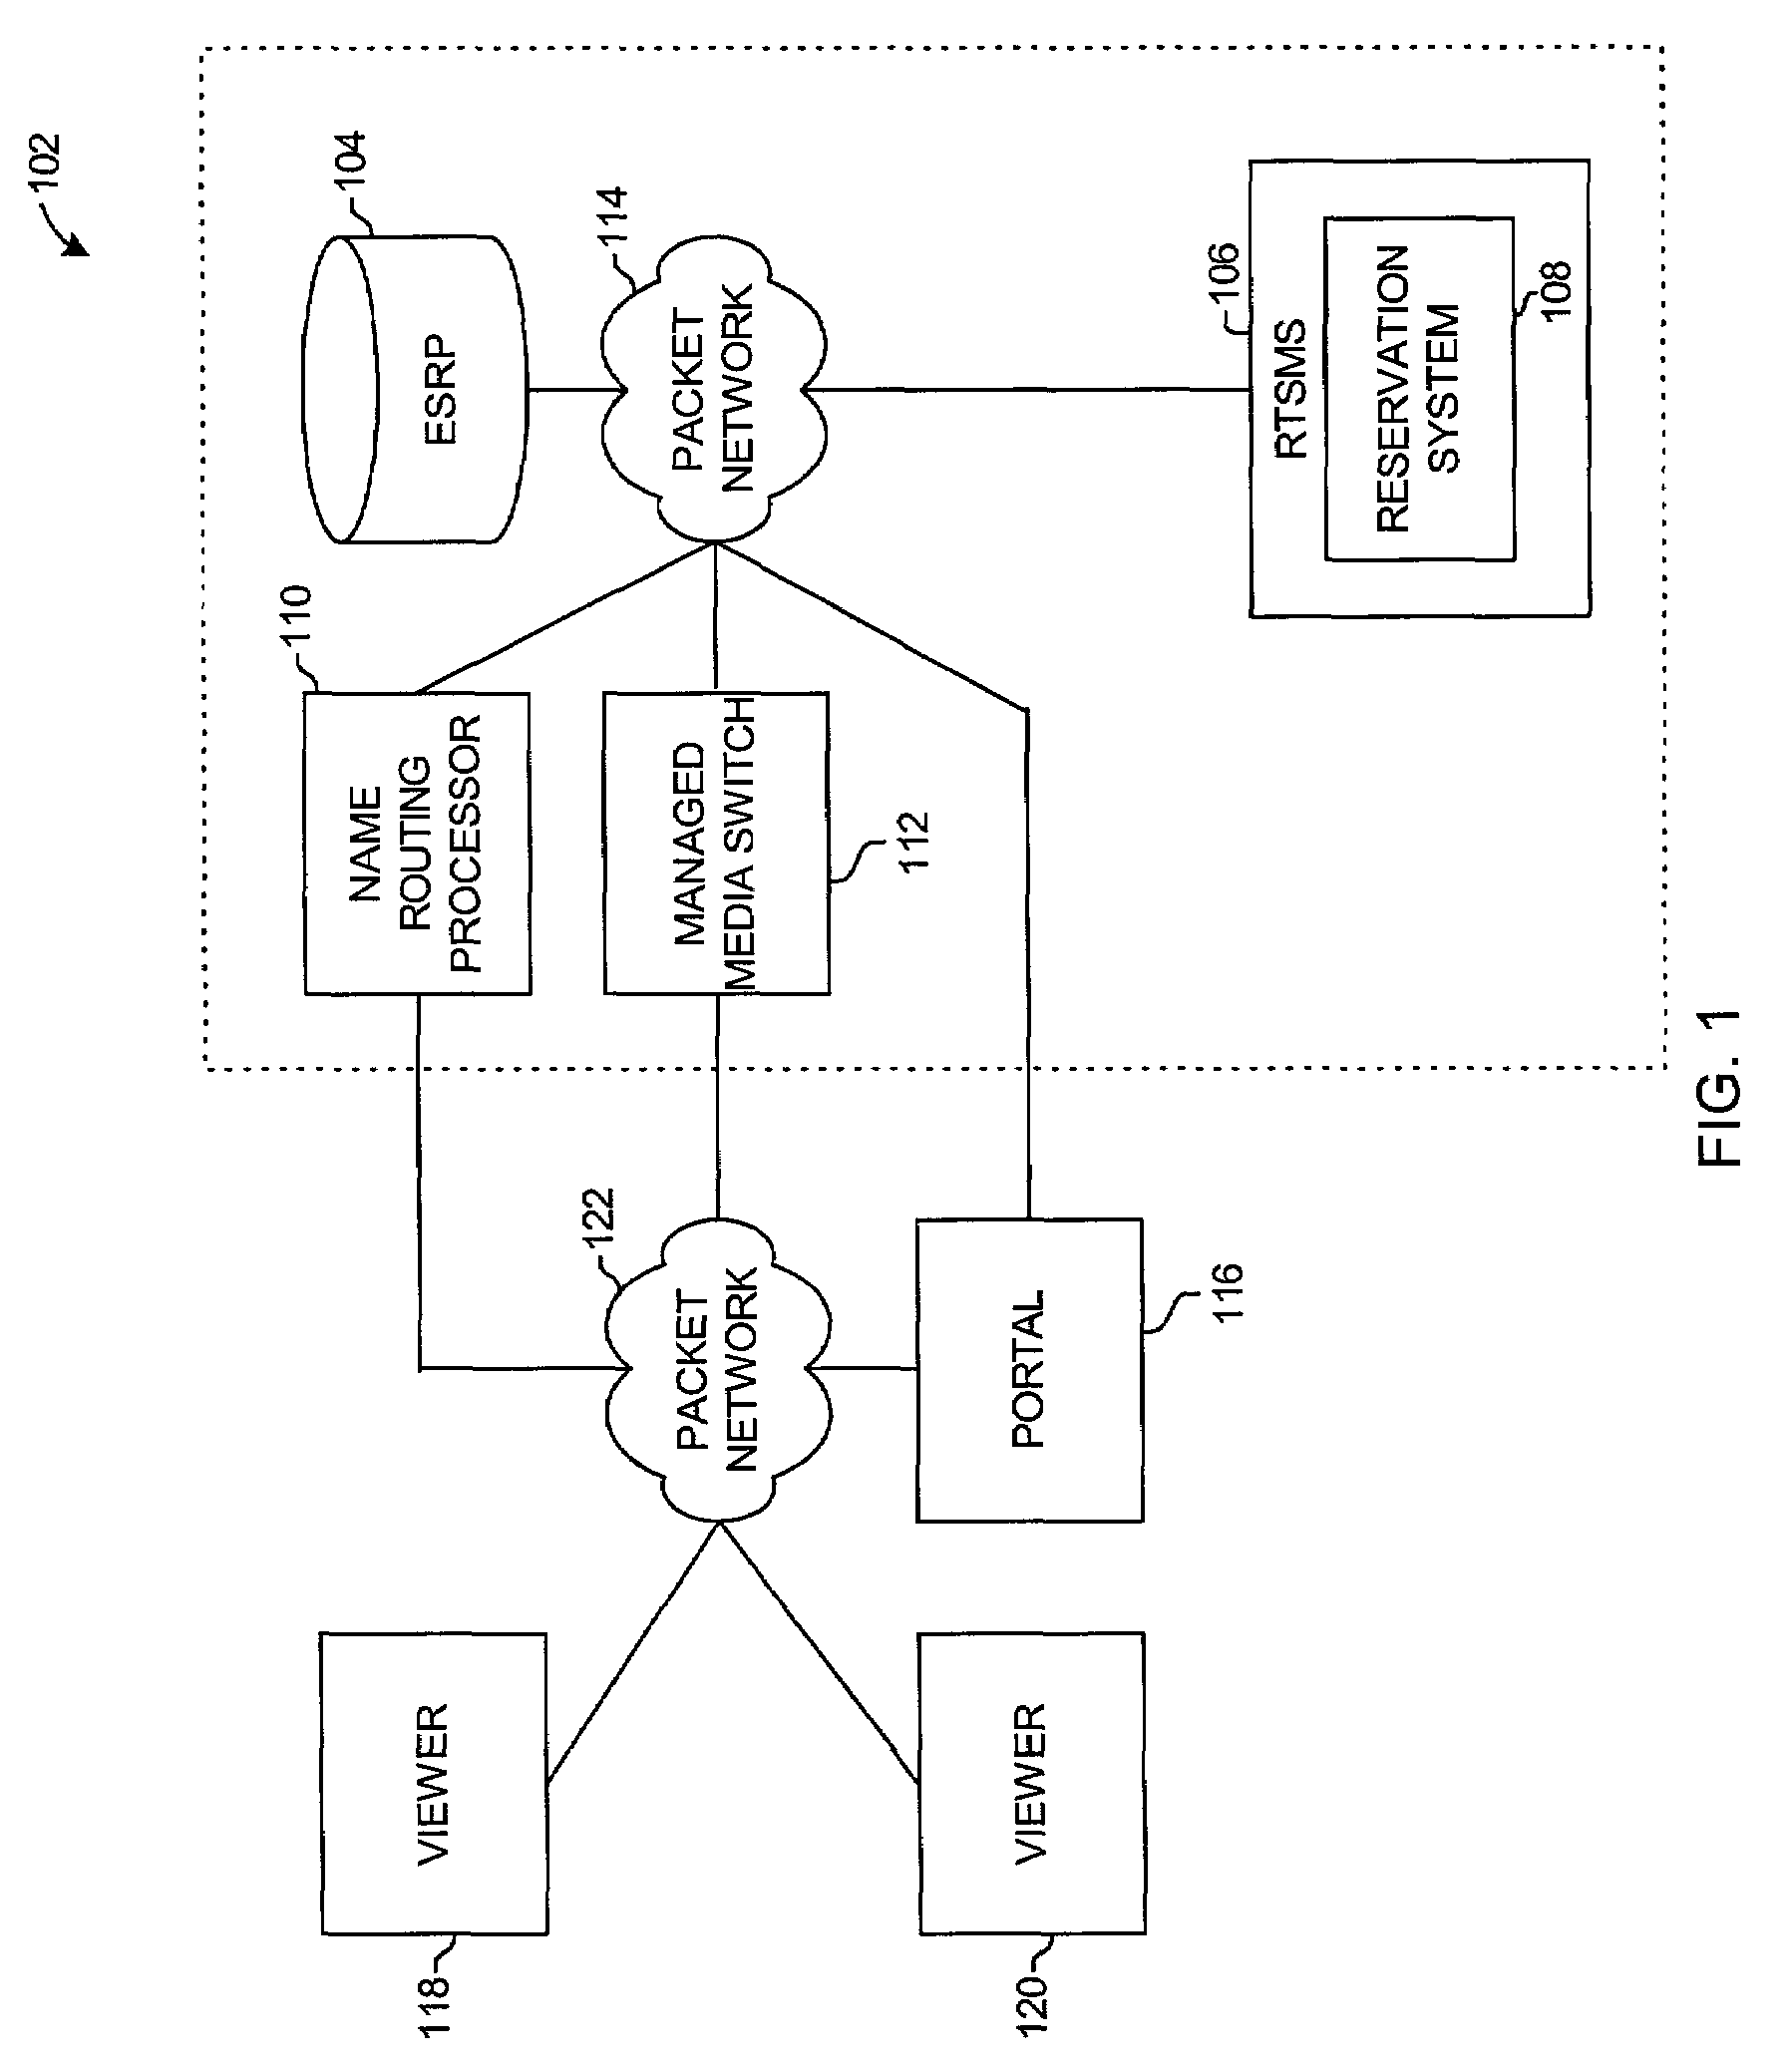 System and method for routing media